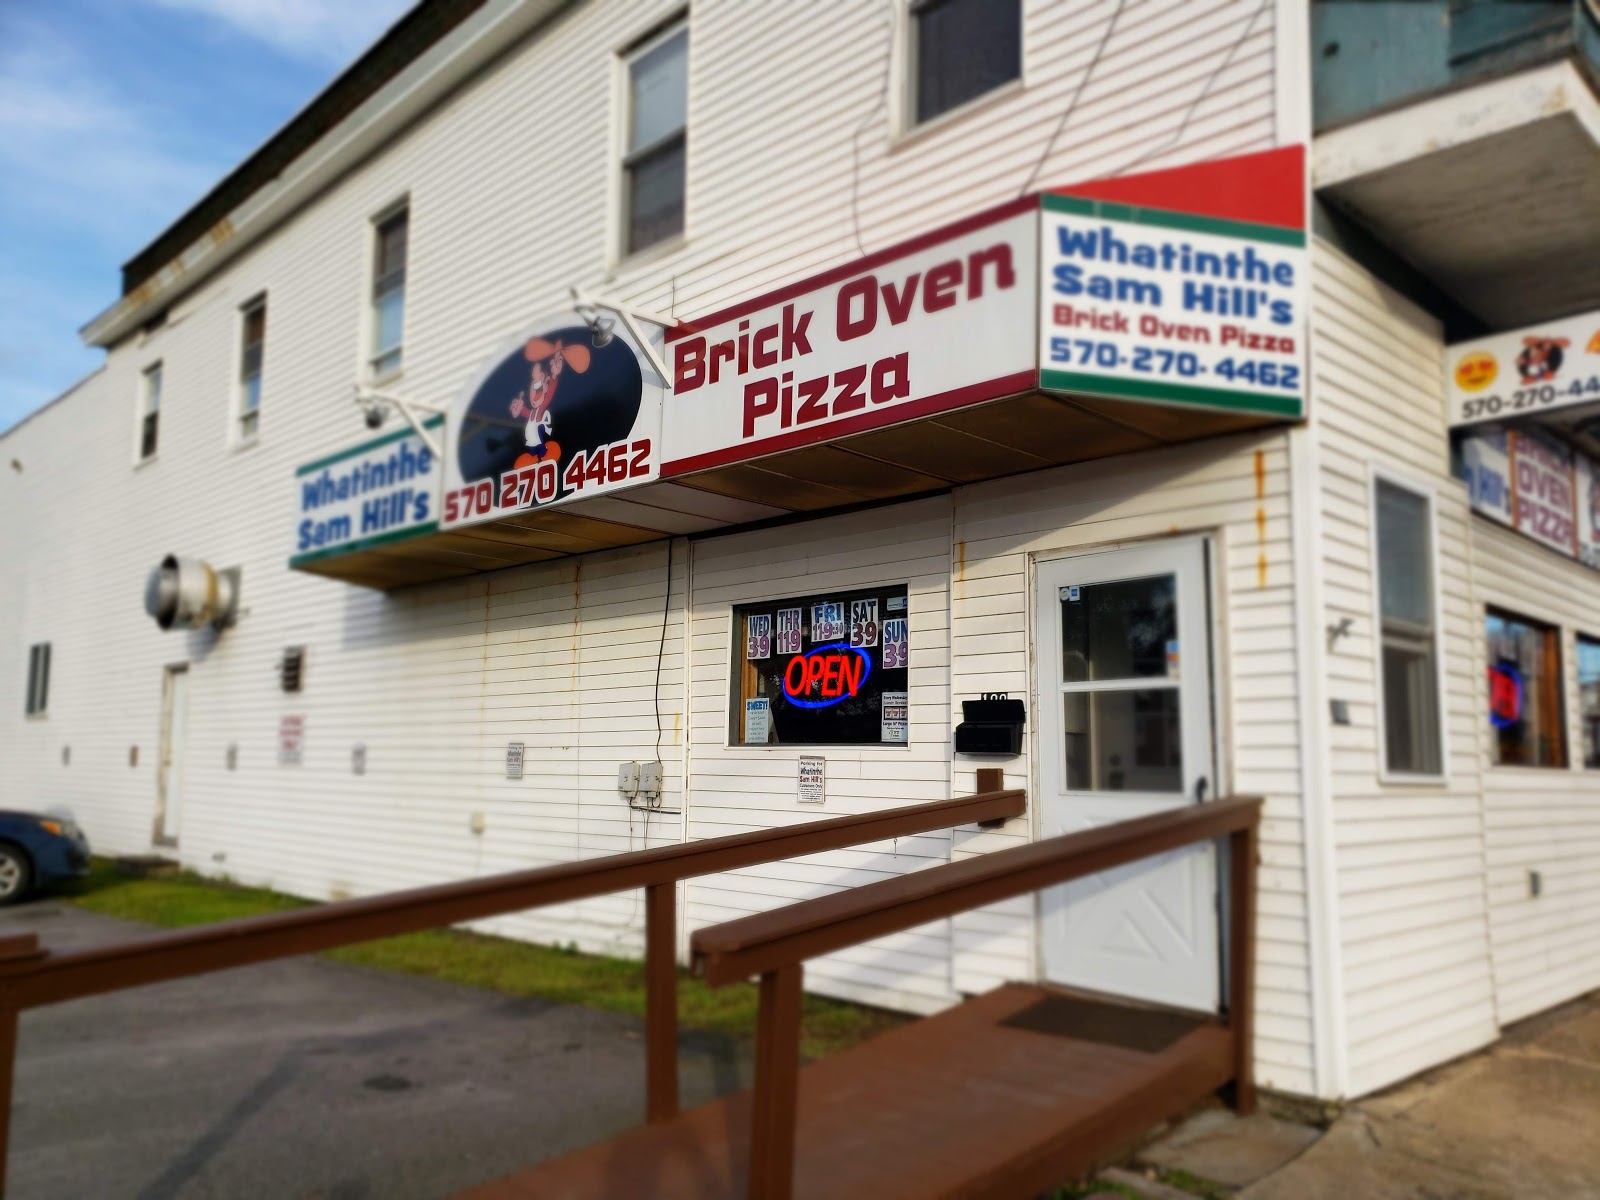 What In The Sam Hills Pizza Wilkes Barre Nepa Pizza Review